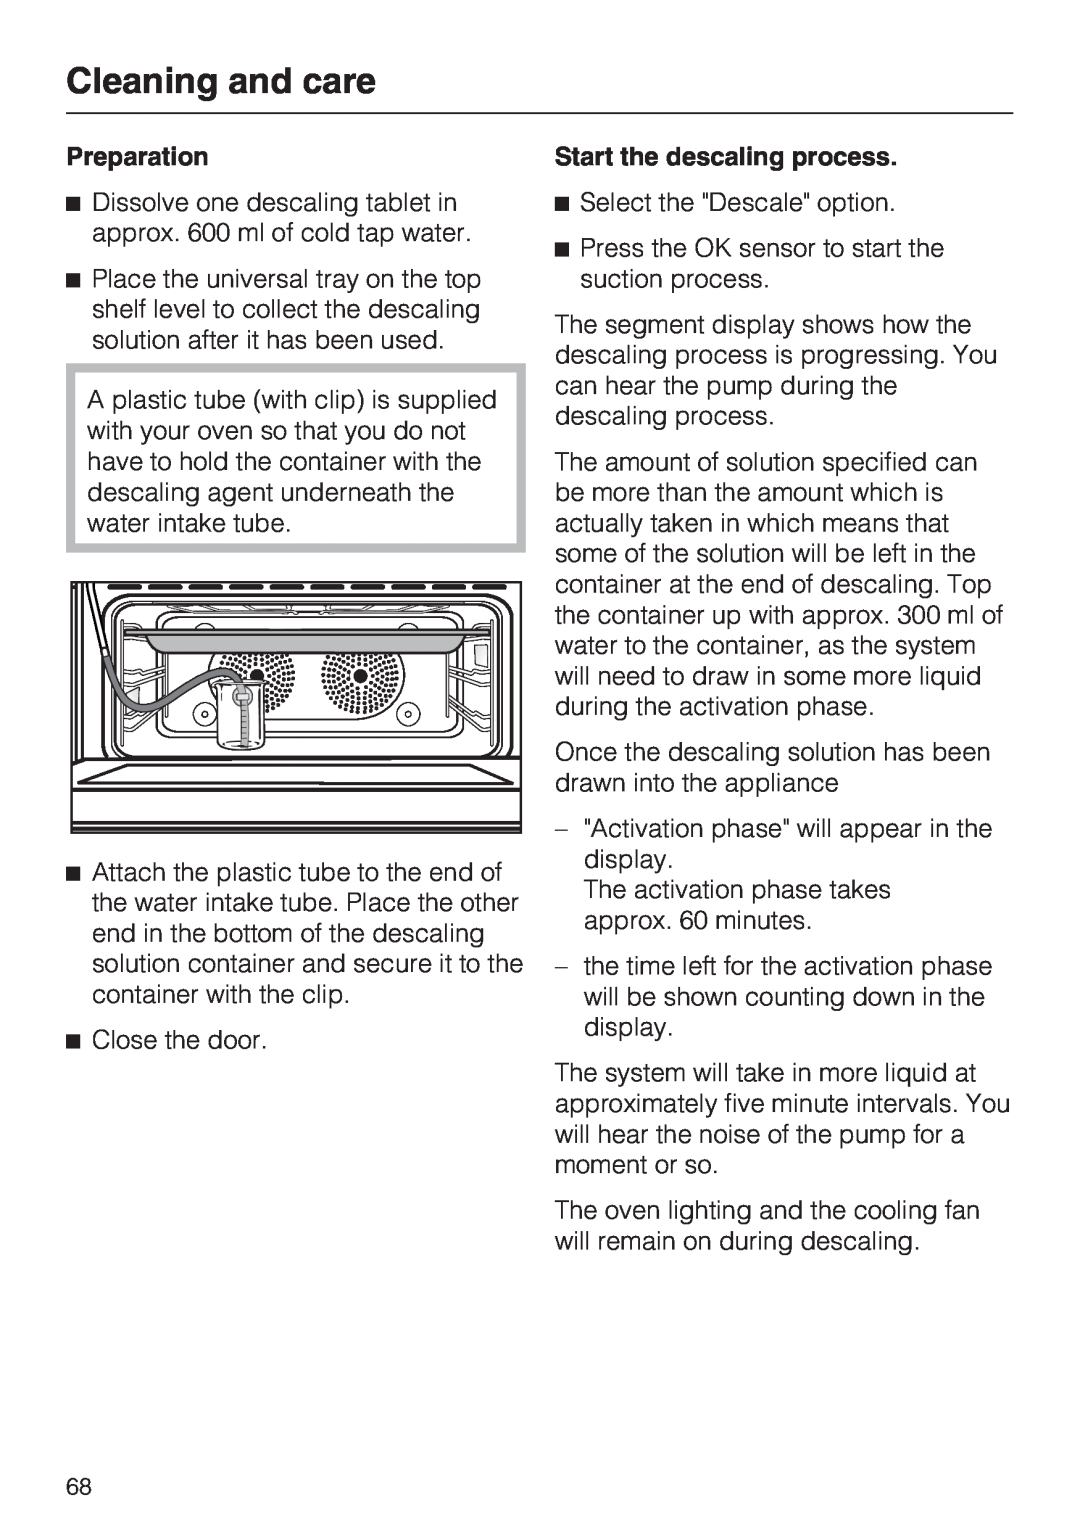 Miele H 5961 B installation instructions Preparation, Start the descaling process, Cleaning and care 